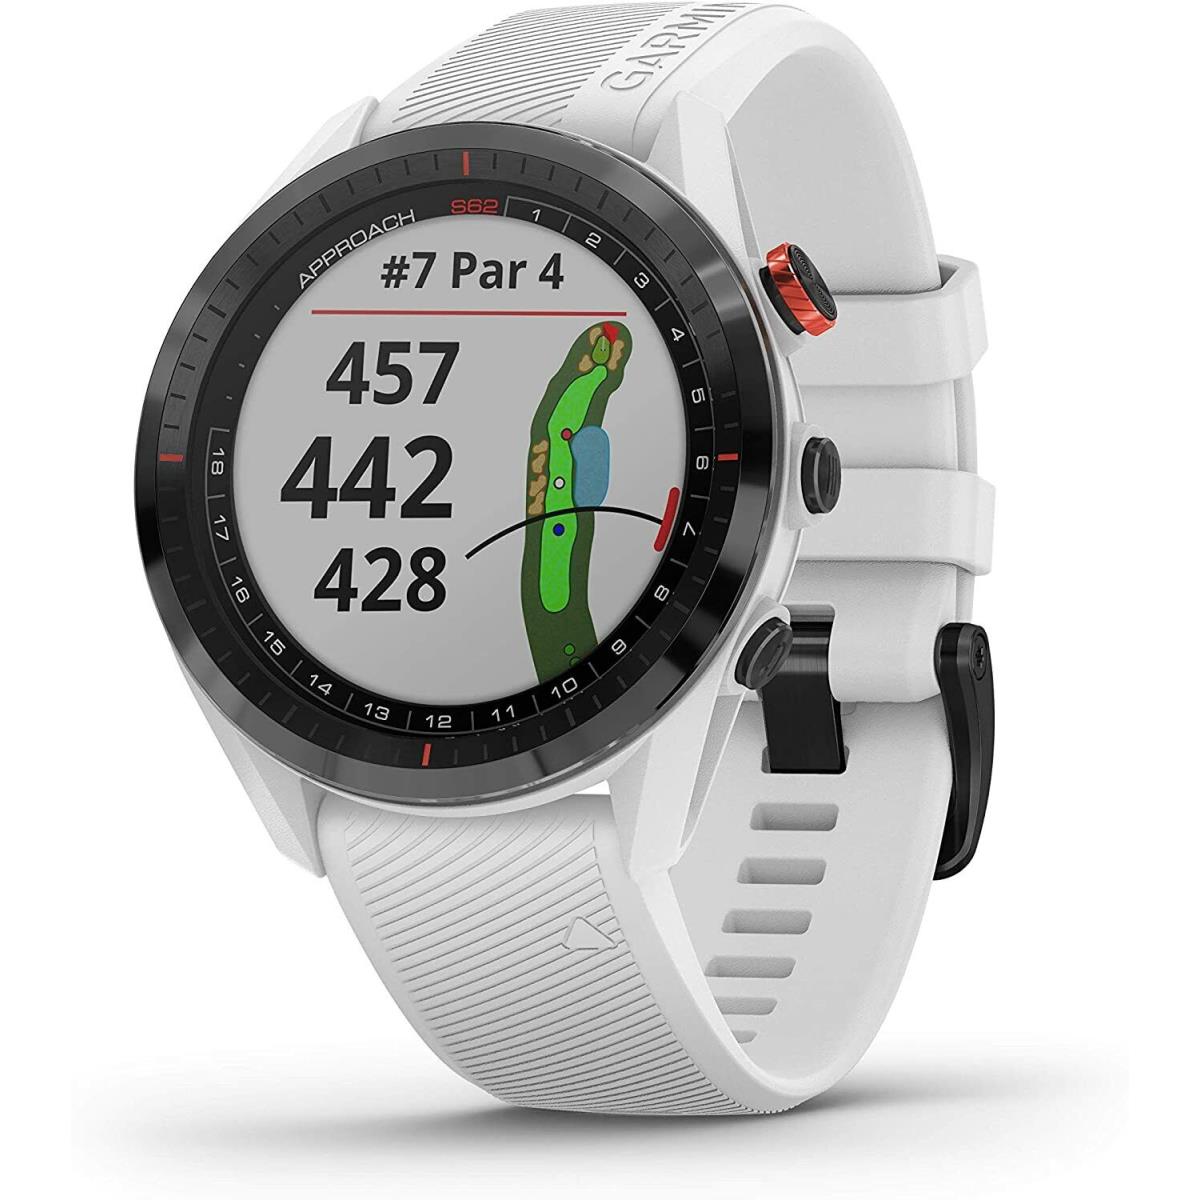 Garmin Approach S62 Premium Gps Golf Watch Black bezel and white silicone band/ watch only